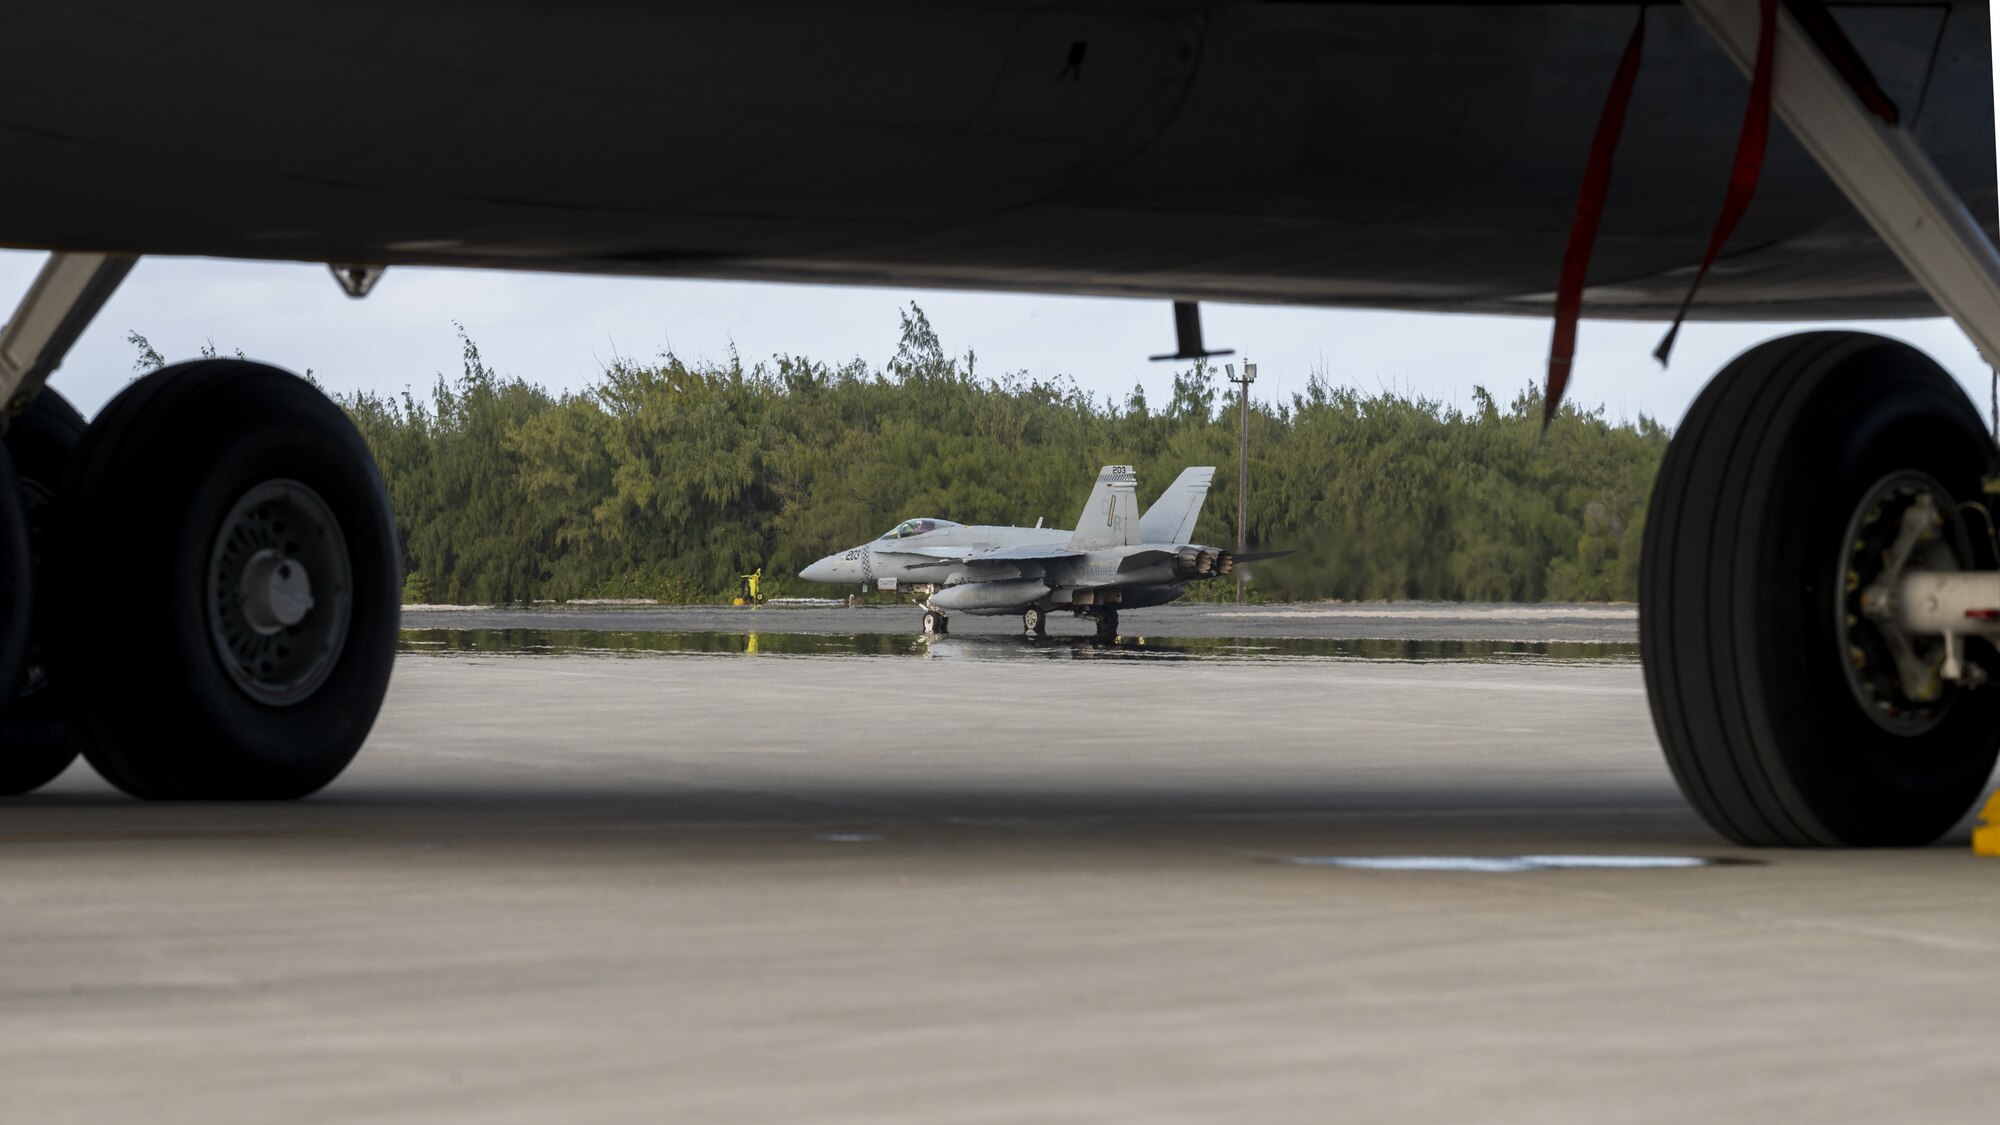 A U.S. Marine Corps F/A-18C Hornet taxis following an air refueling coronet mission at Wake Island, March 9, 2023. Aircrew from the 384th Air Refueling Squadron conducted an air refueling coronet with Marines from the Marine Fighter Attack Squadron 312, demonstrating the critical role mobility forces have in projecting the joint force anywhere, anytime. (U.S. Air Force photo by Staff Sgt. Lawrence Sena)